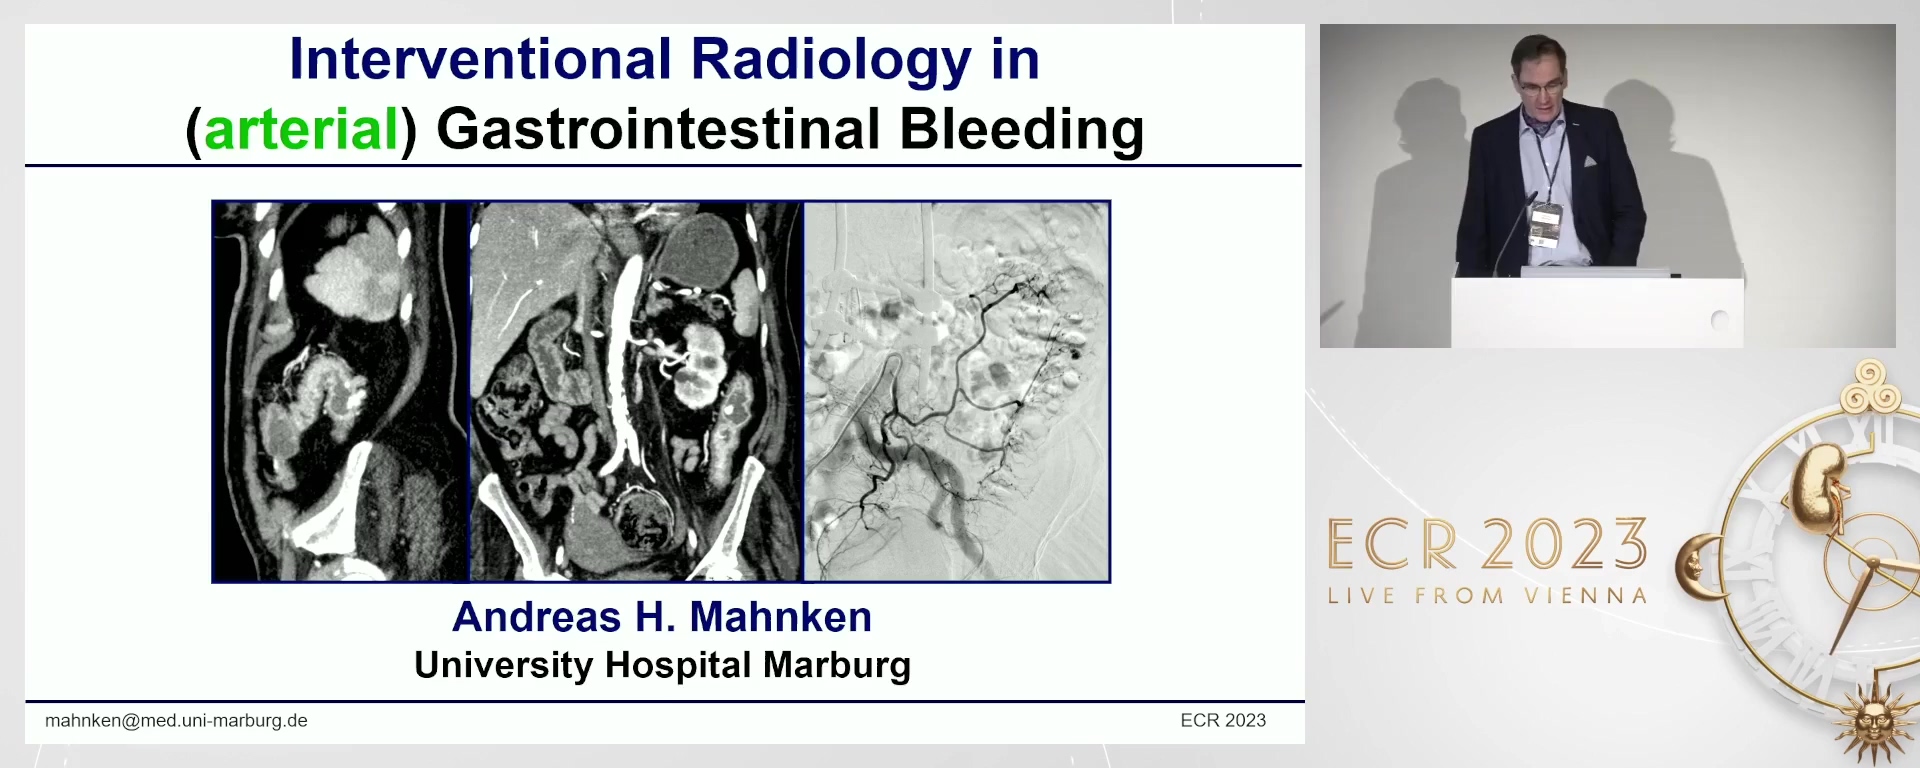 Management of GI bleeding: the role of interventional radiology